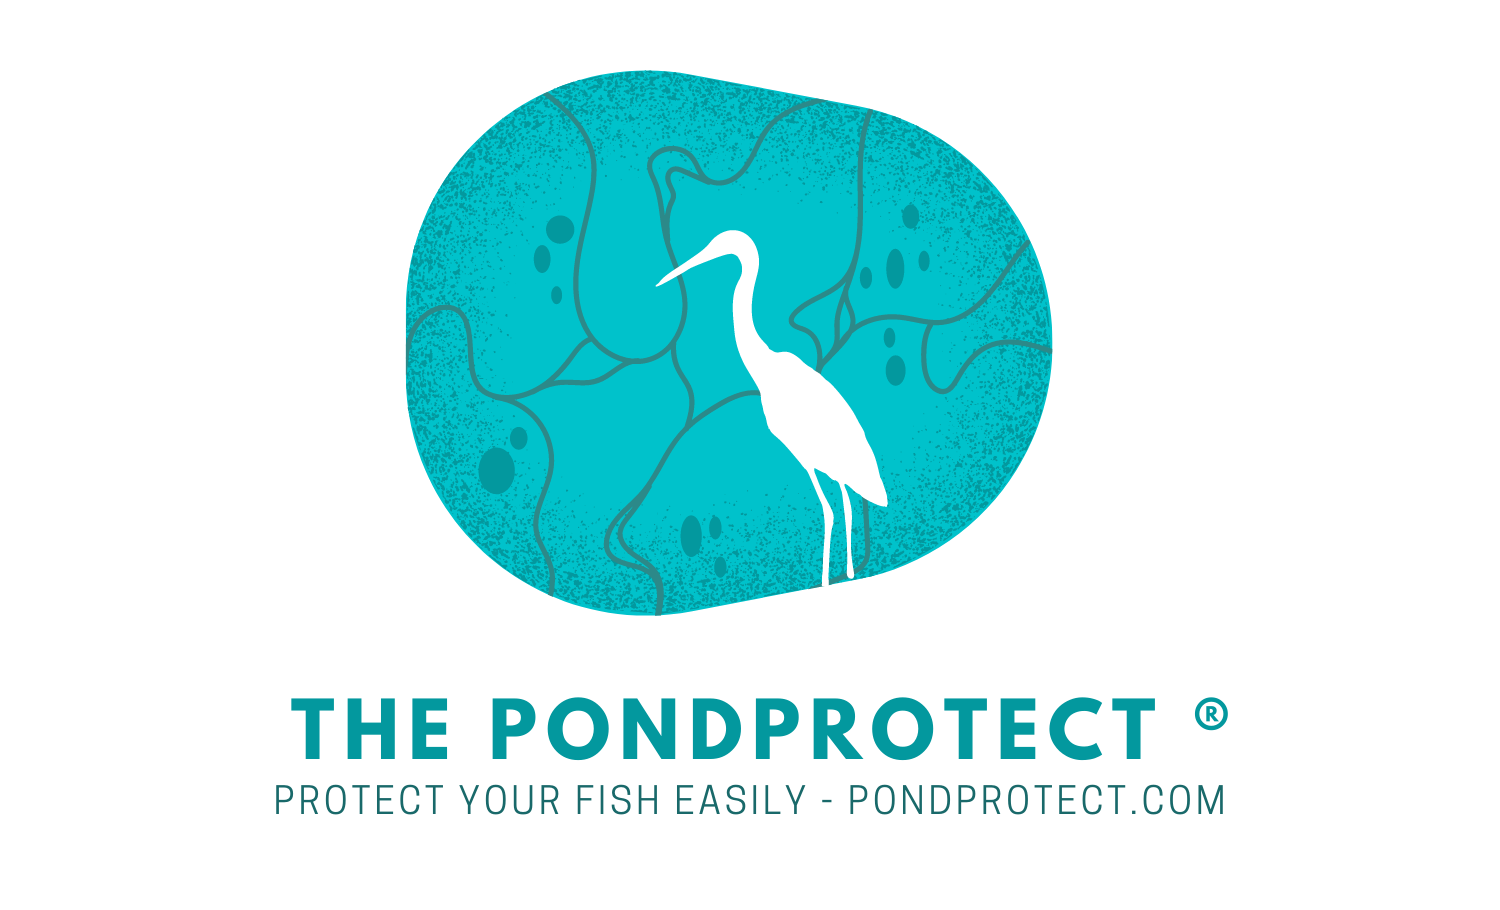 The PondProtect